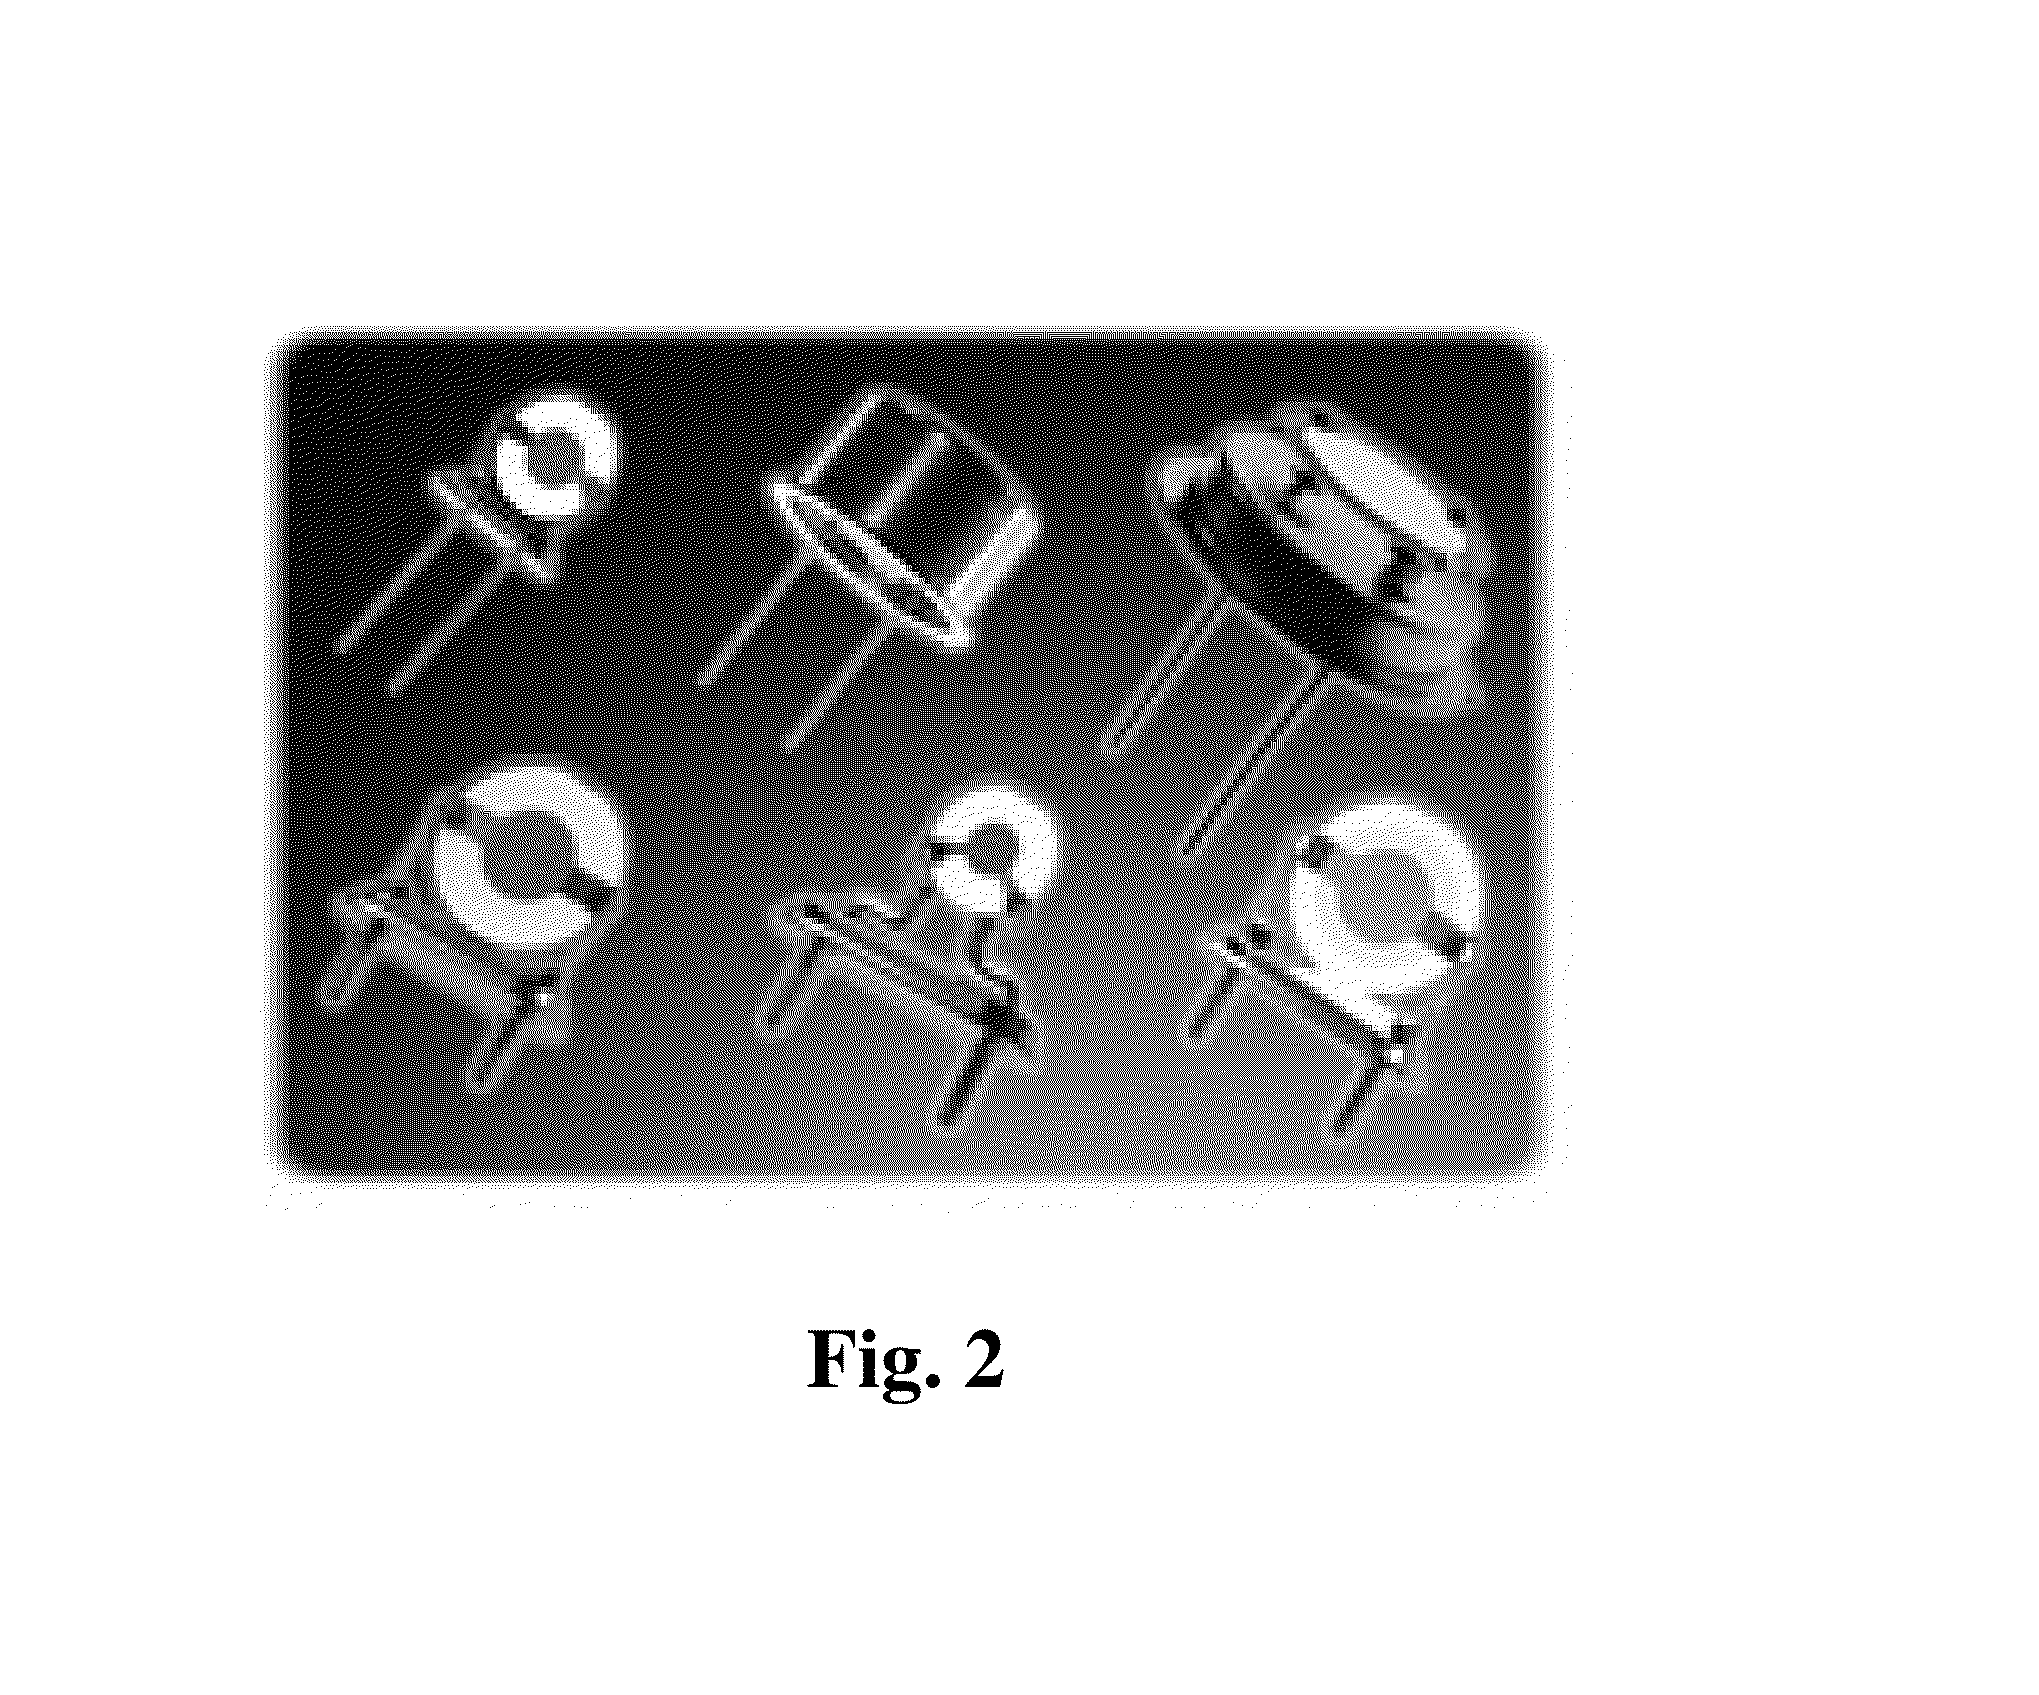 Method and Device for Detecting Odorants in Hydrocarbon Gases